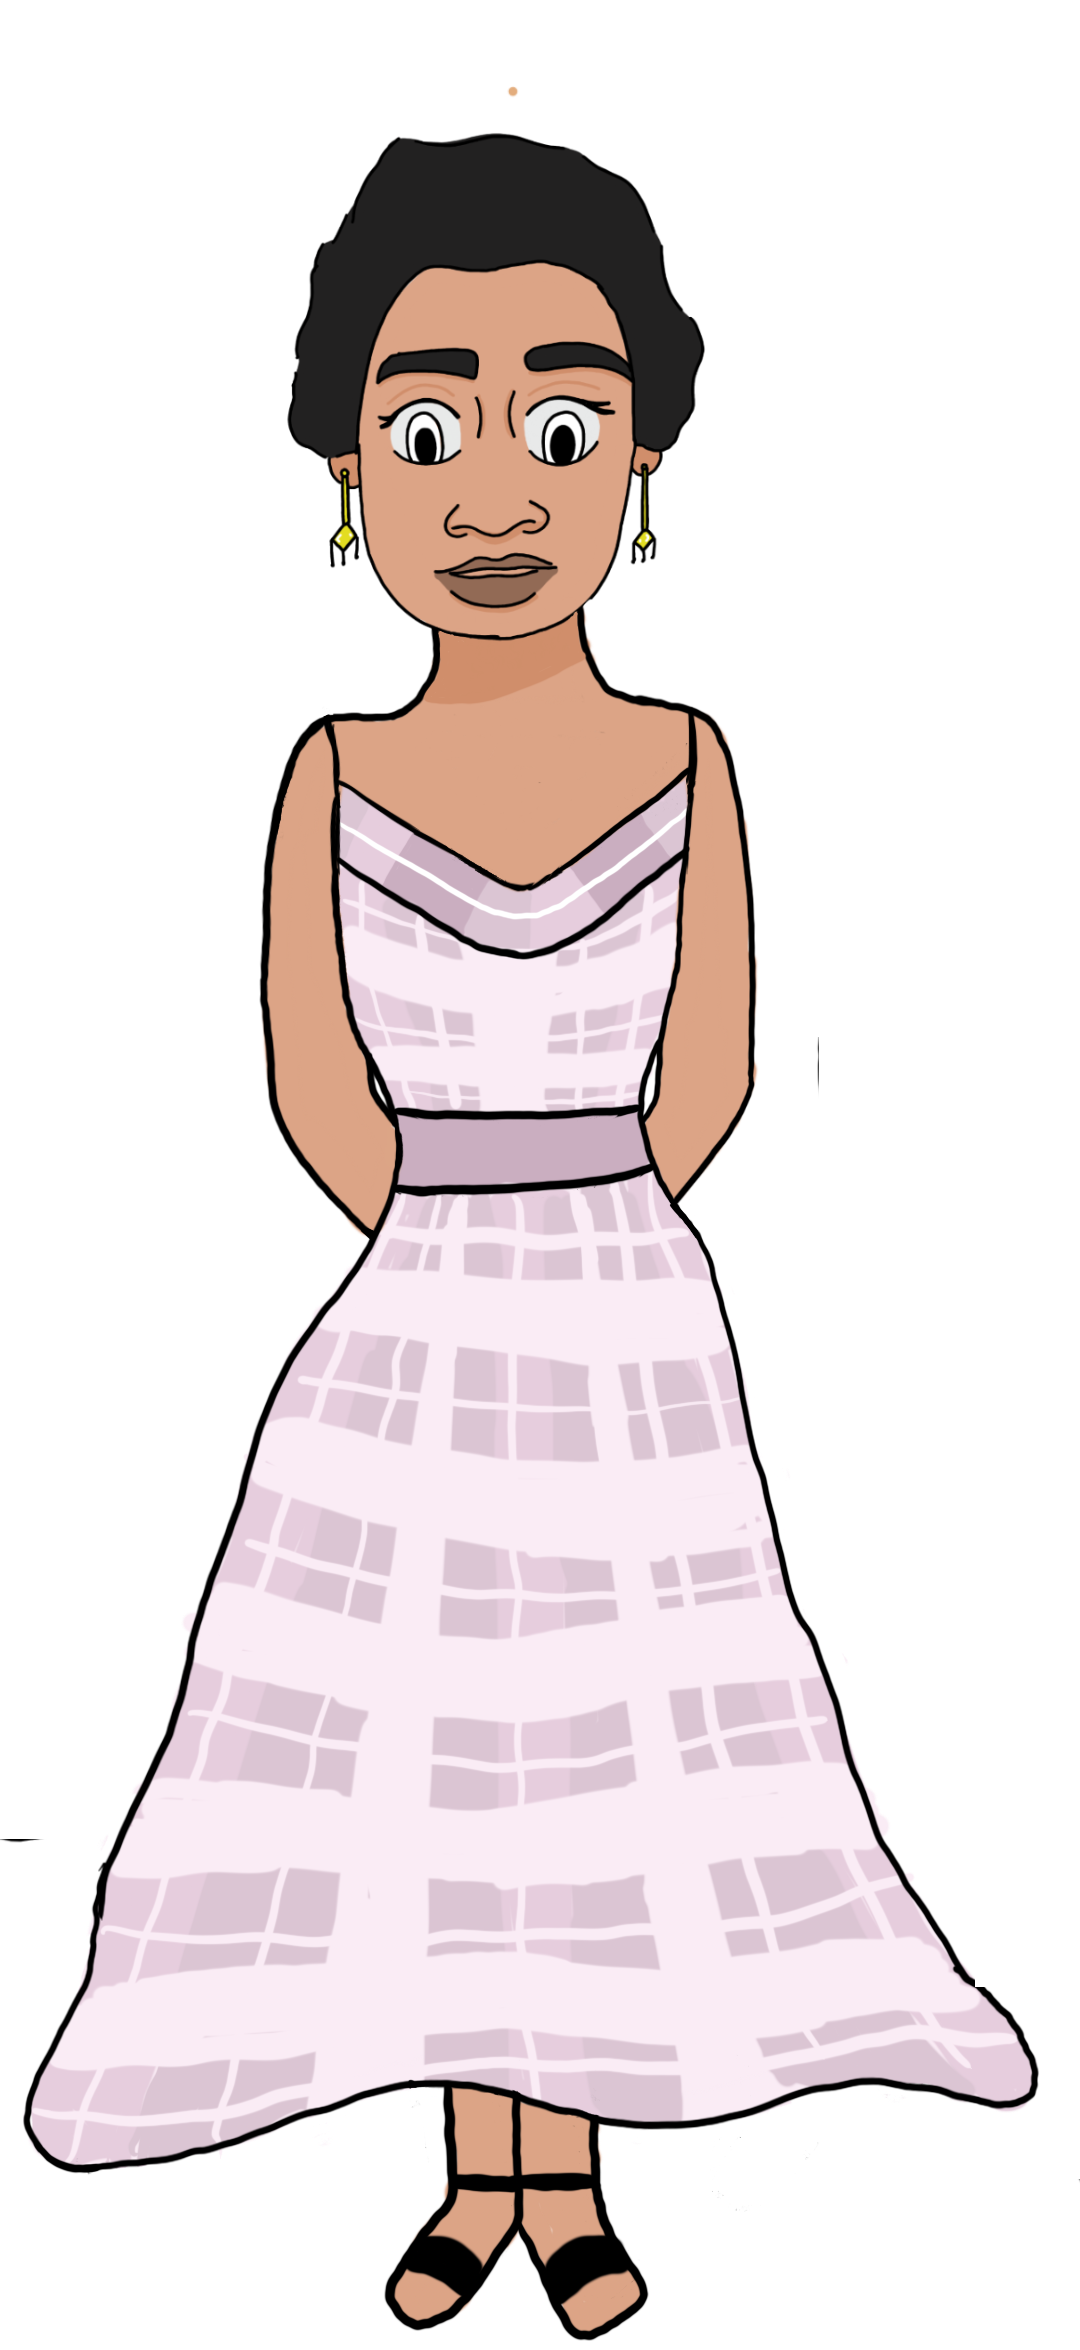 A digital cartoon depicting a woman with dark hair and gold earrings, donning a sleeveless, V-neck dress in a soft pink hue.